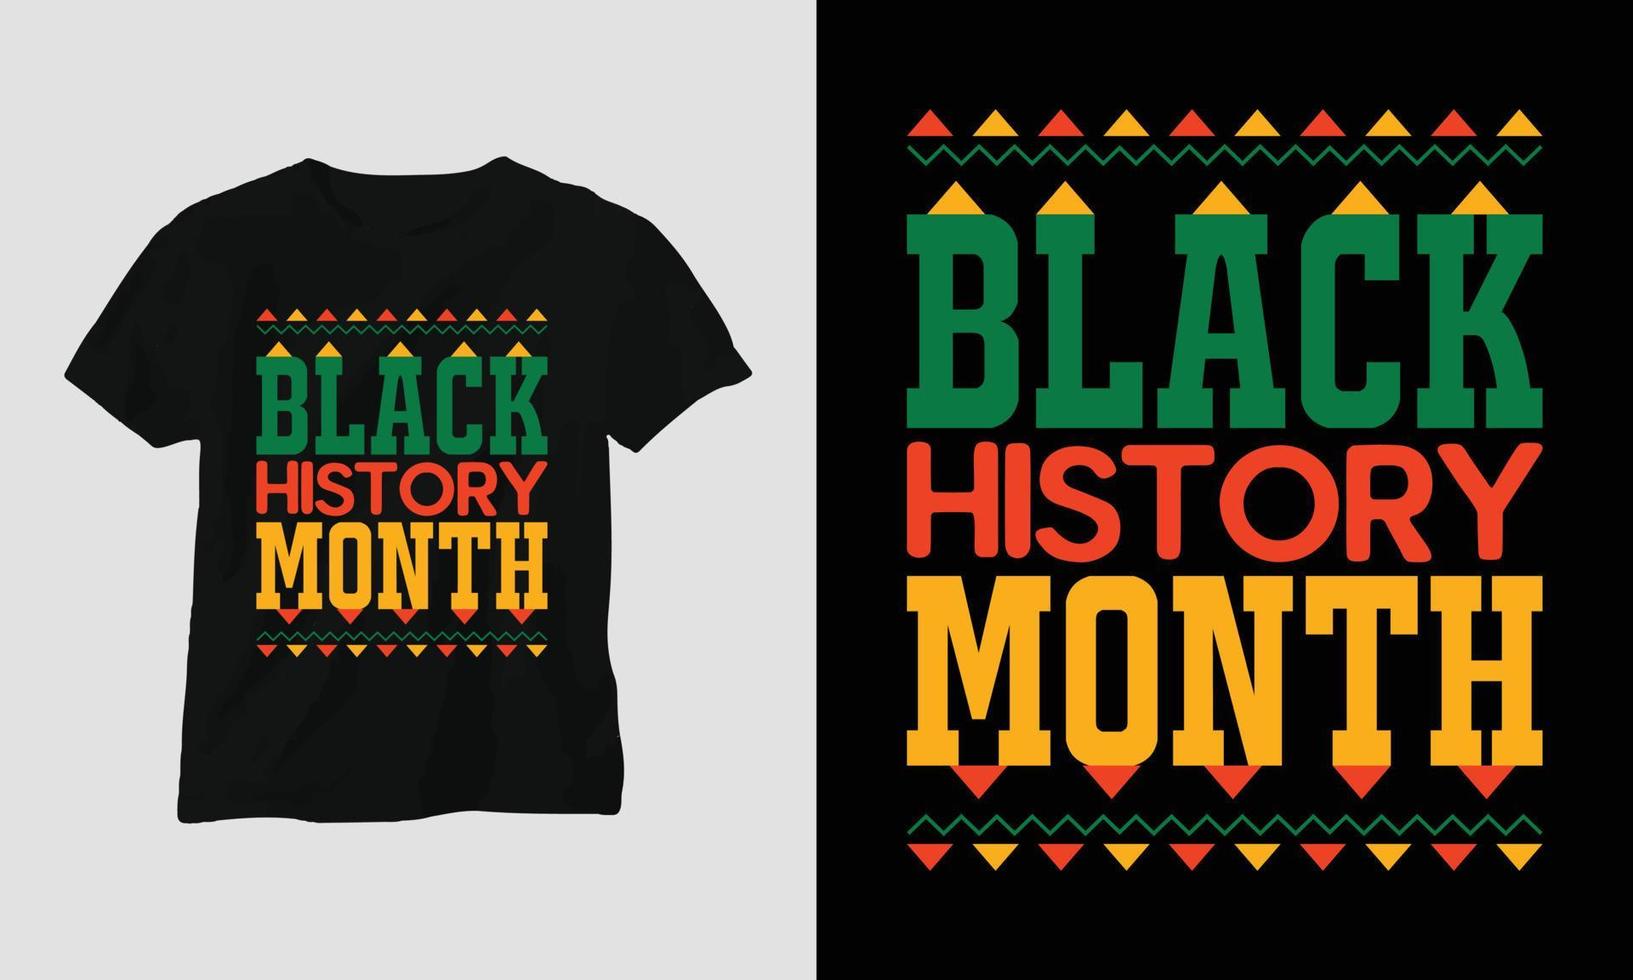 black history month - Black History Month T-shirt vector